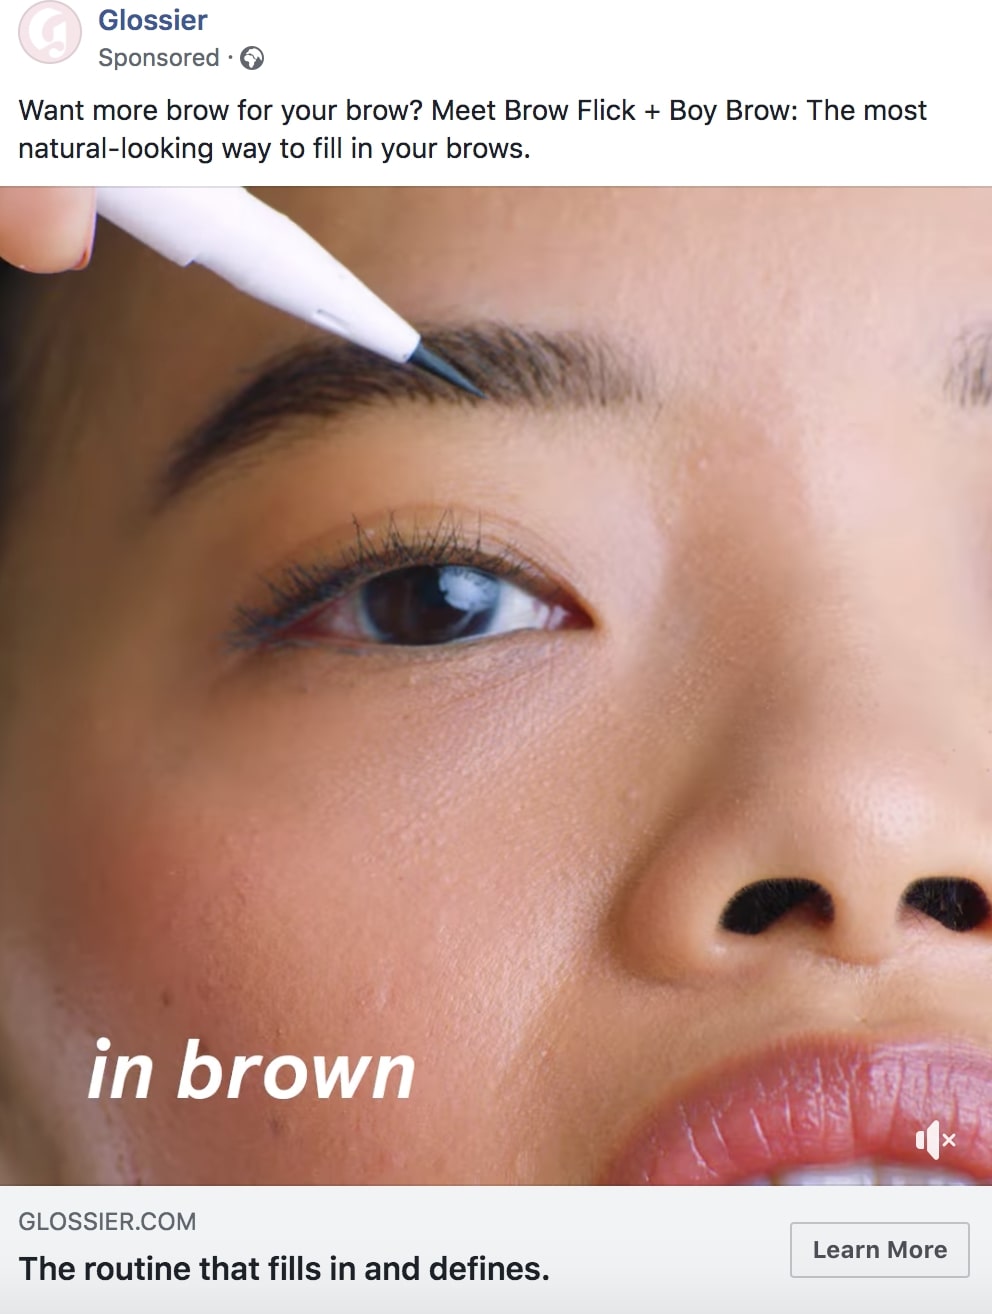 facebook ad for glossier